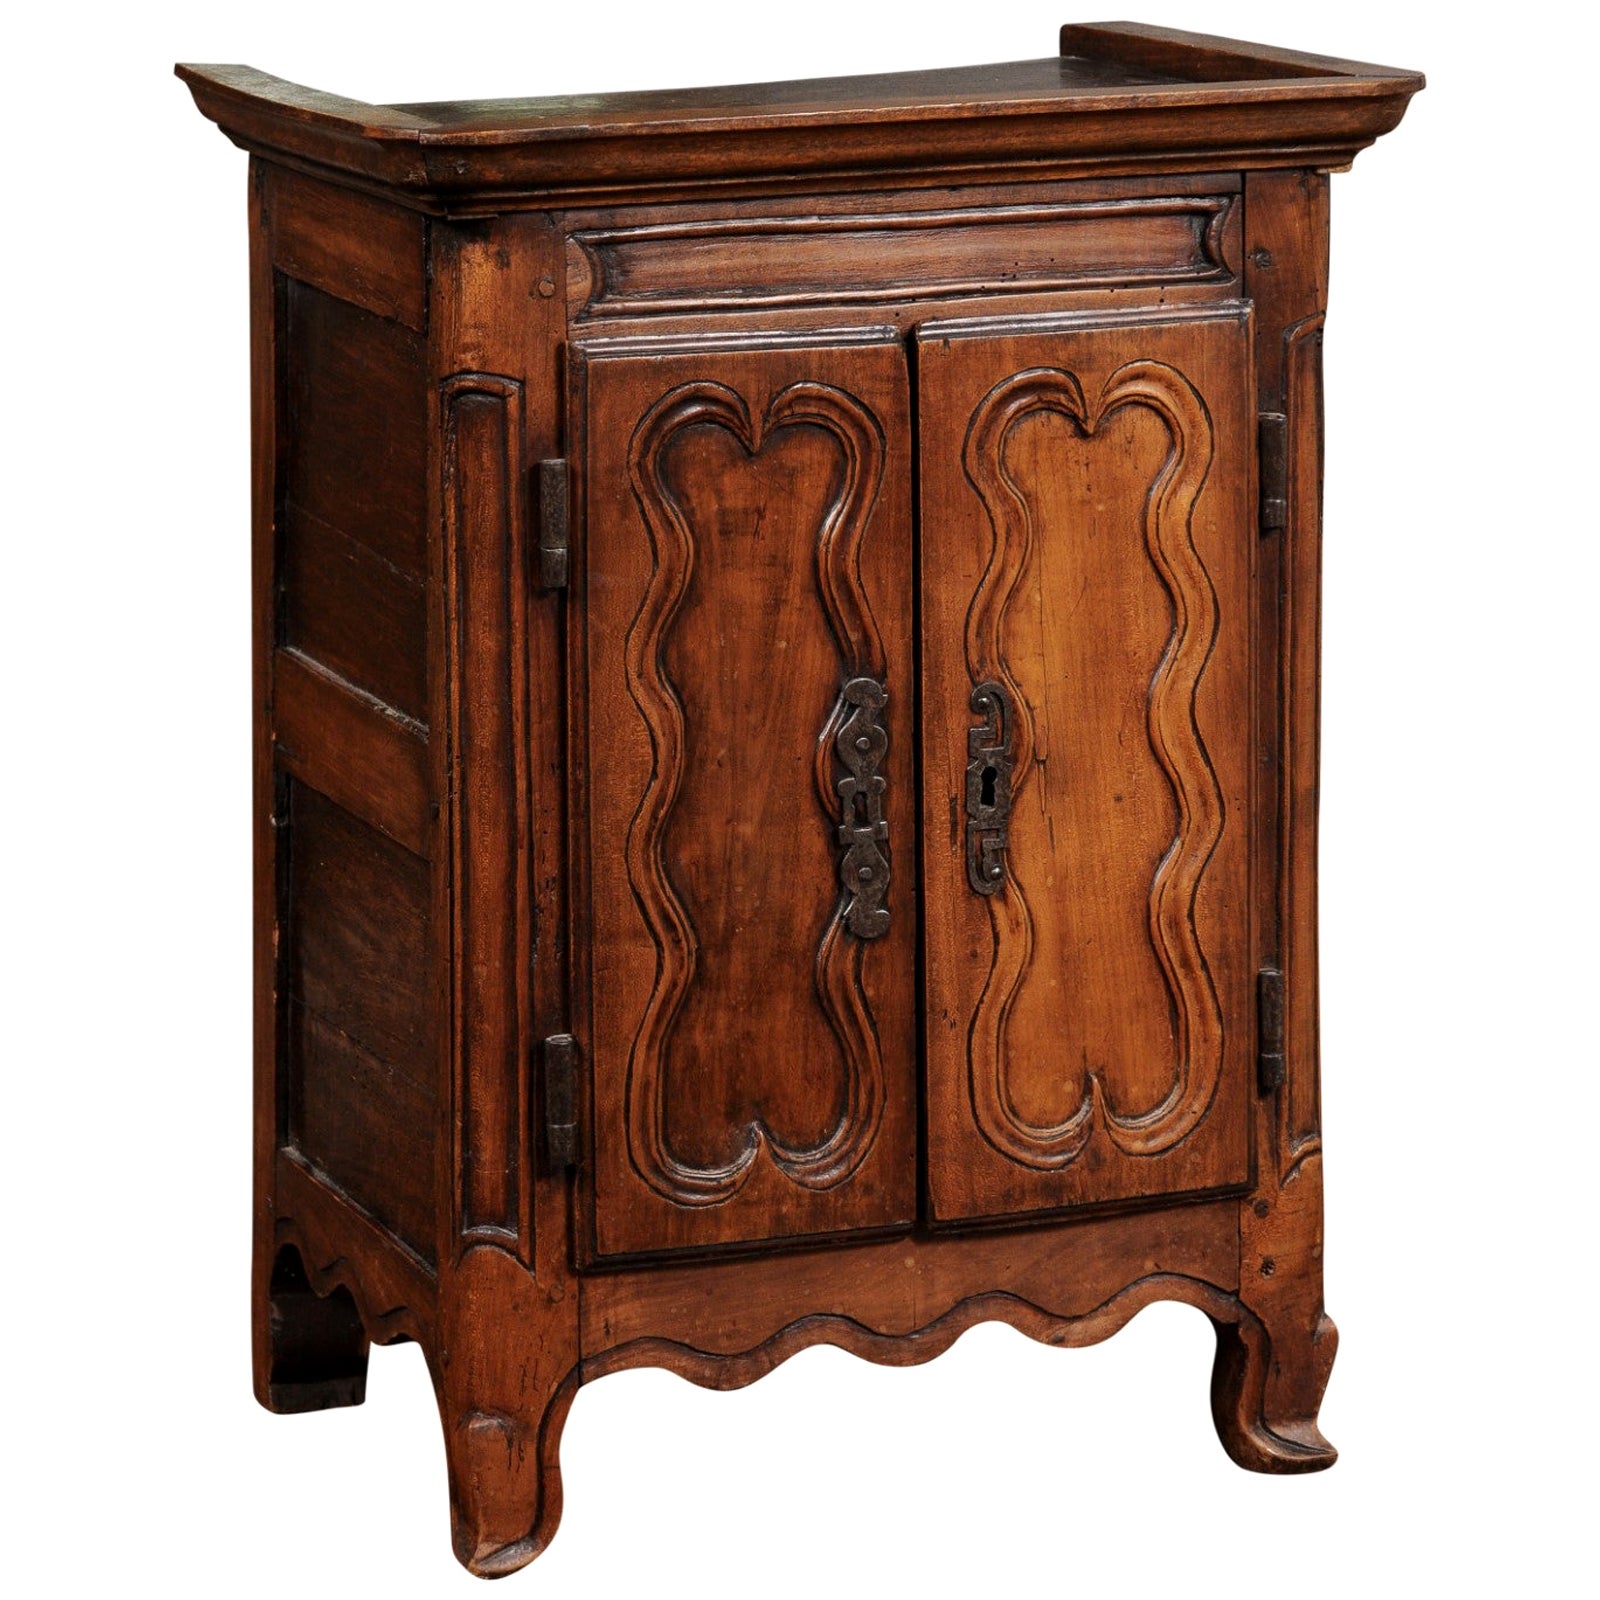 French Napoléon III Period 1850s Miniature Walnut Armoire with Molded Cartouches